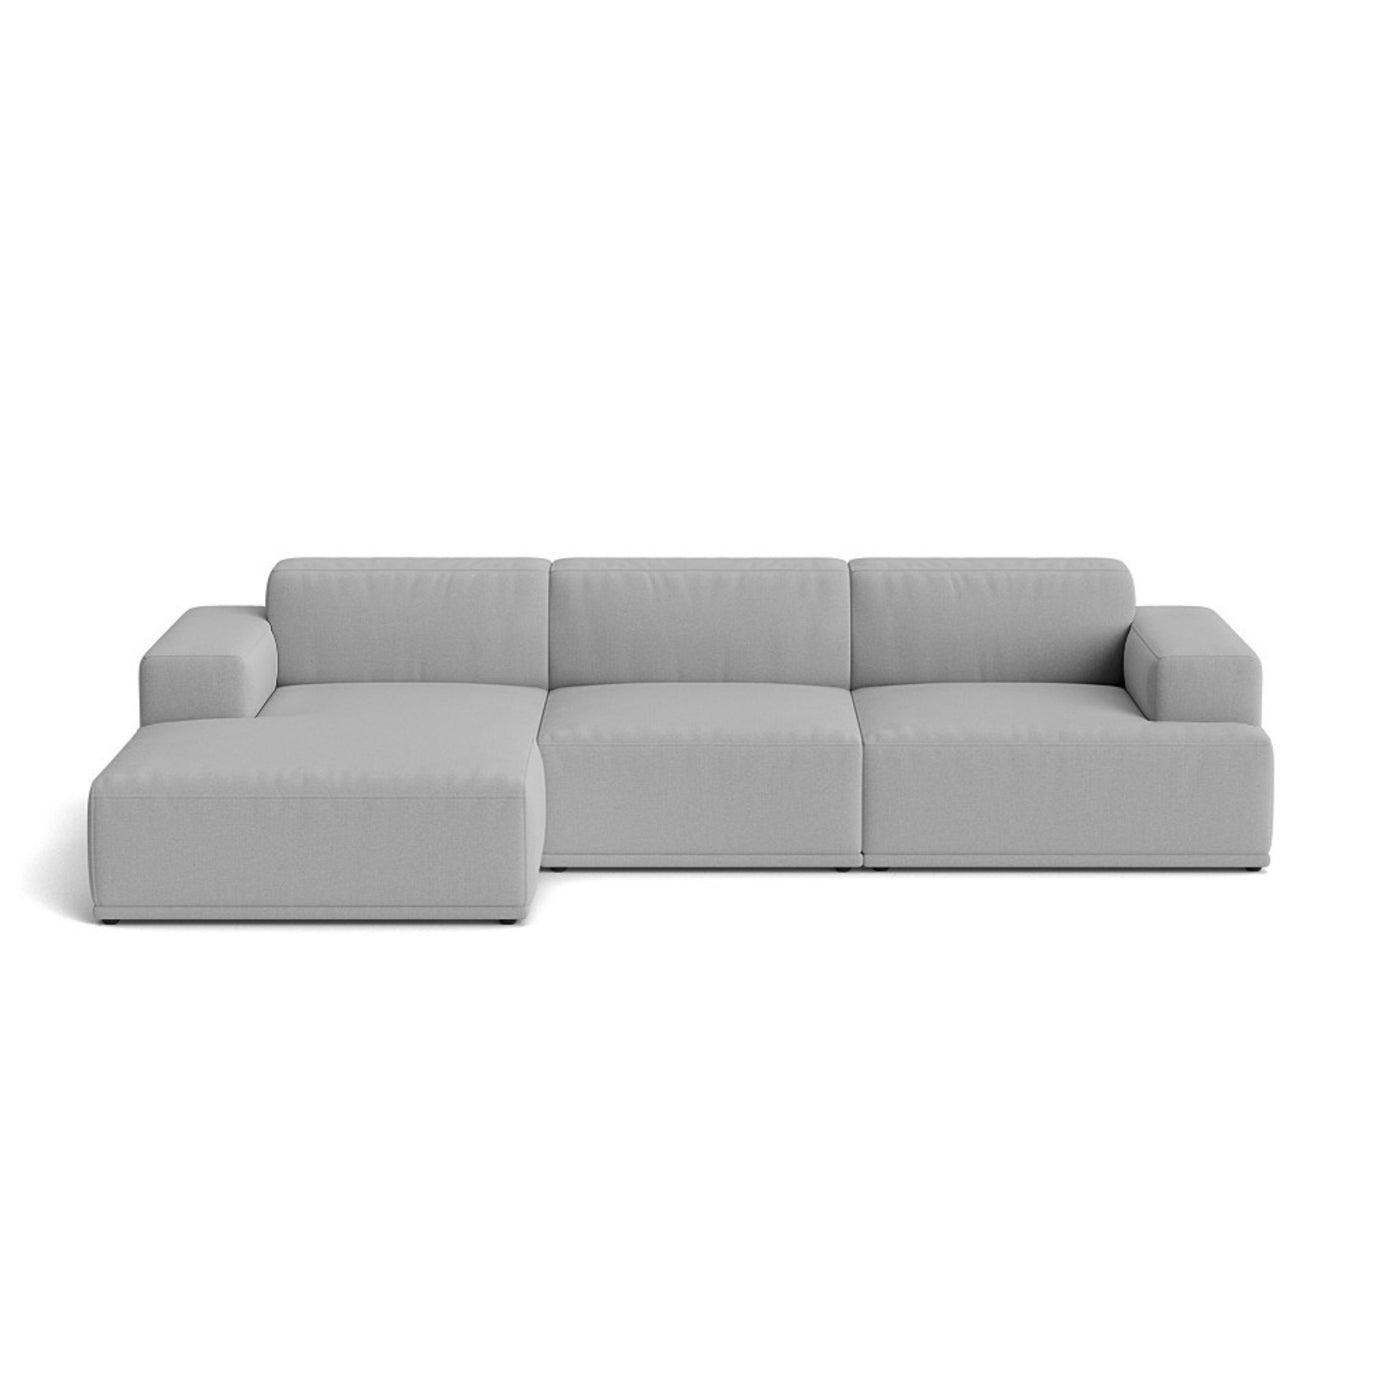 Muuto Connect Soft Modular 3 Seater Sofa, configuration 3. Made-to-order from someday designs. #colour_steelcut-trio-133